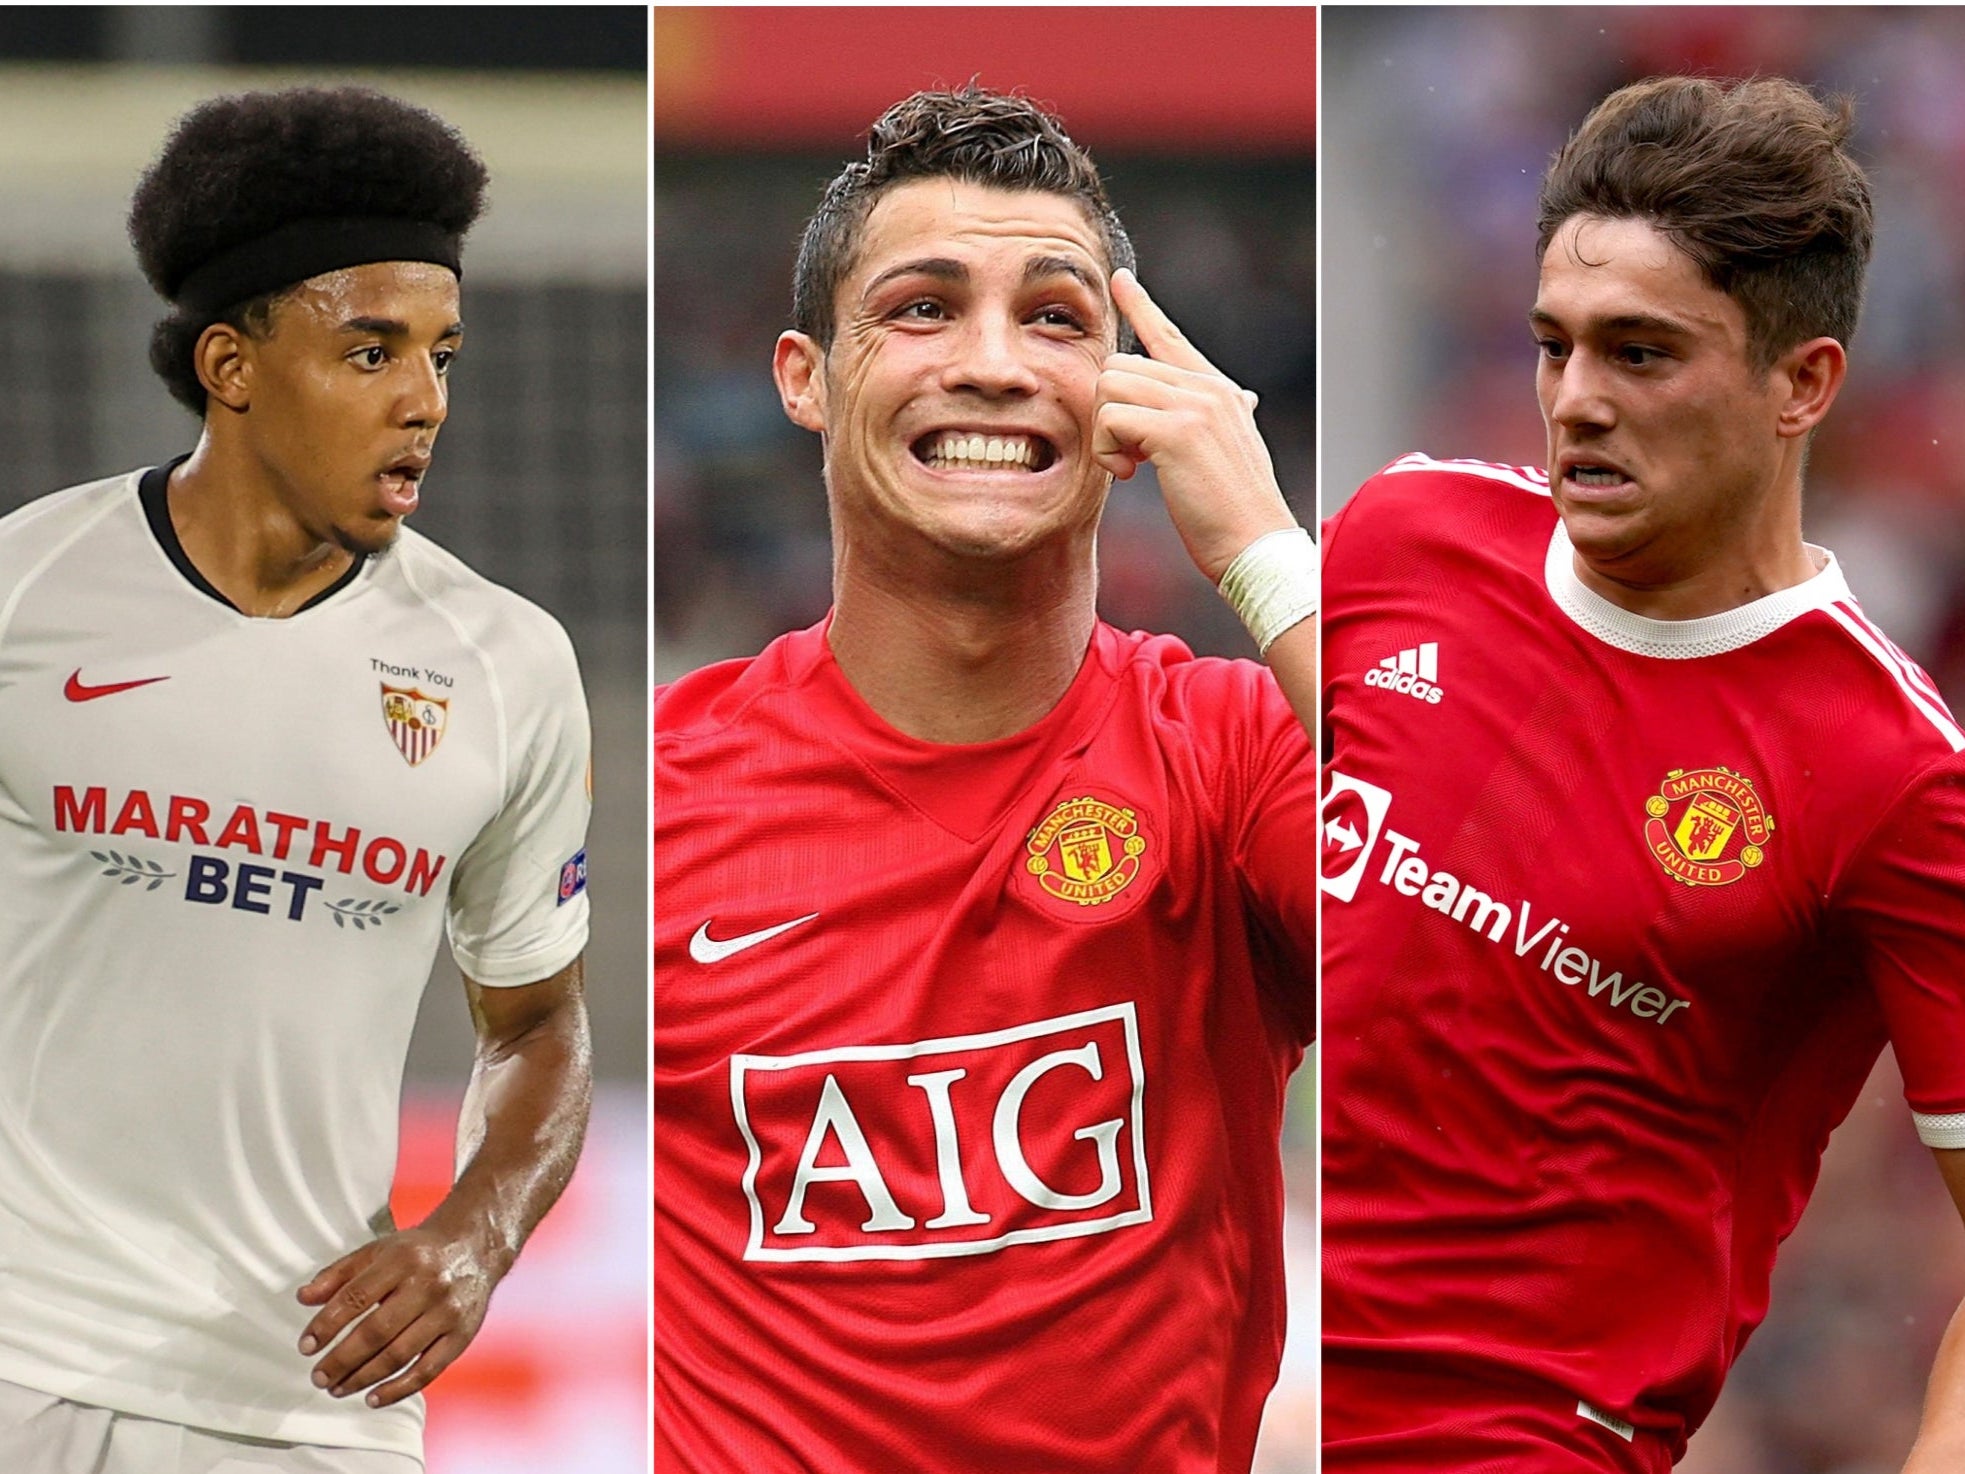 Cristiano Ronaldo, Jules Kounde and Daniel James could be the big movers as the window closes